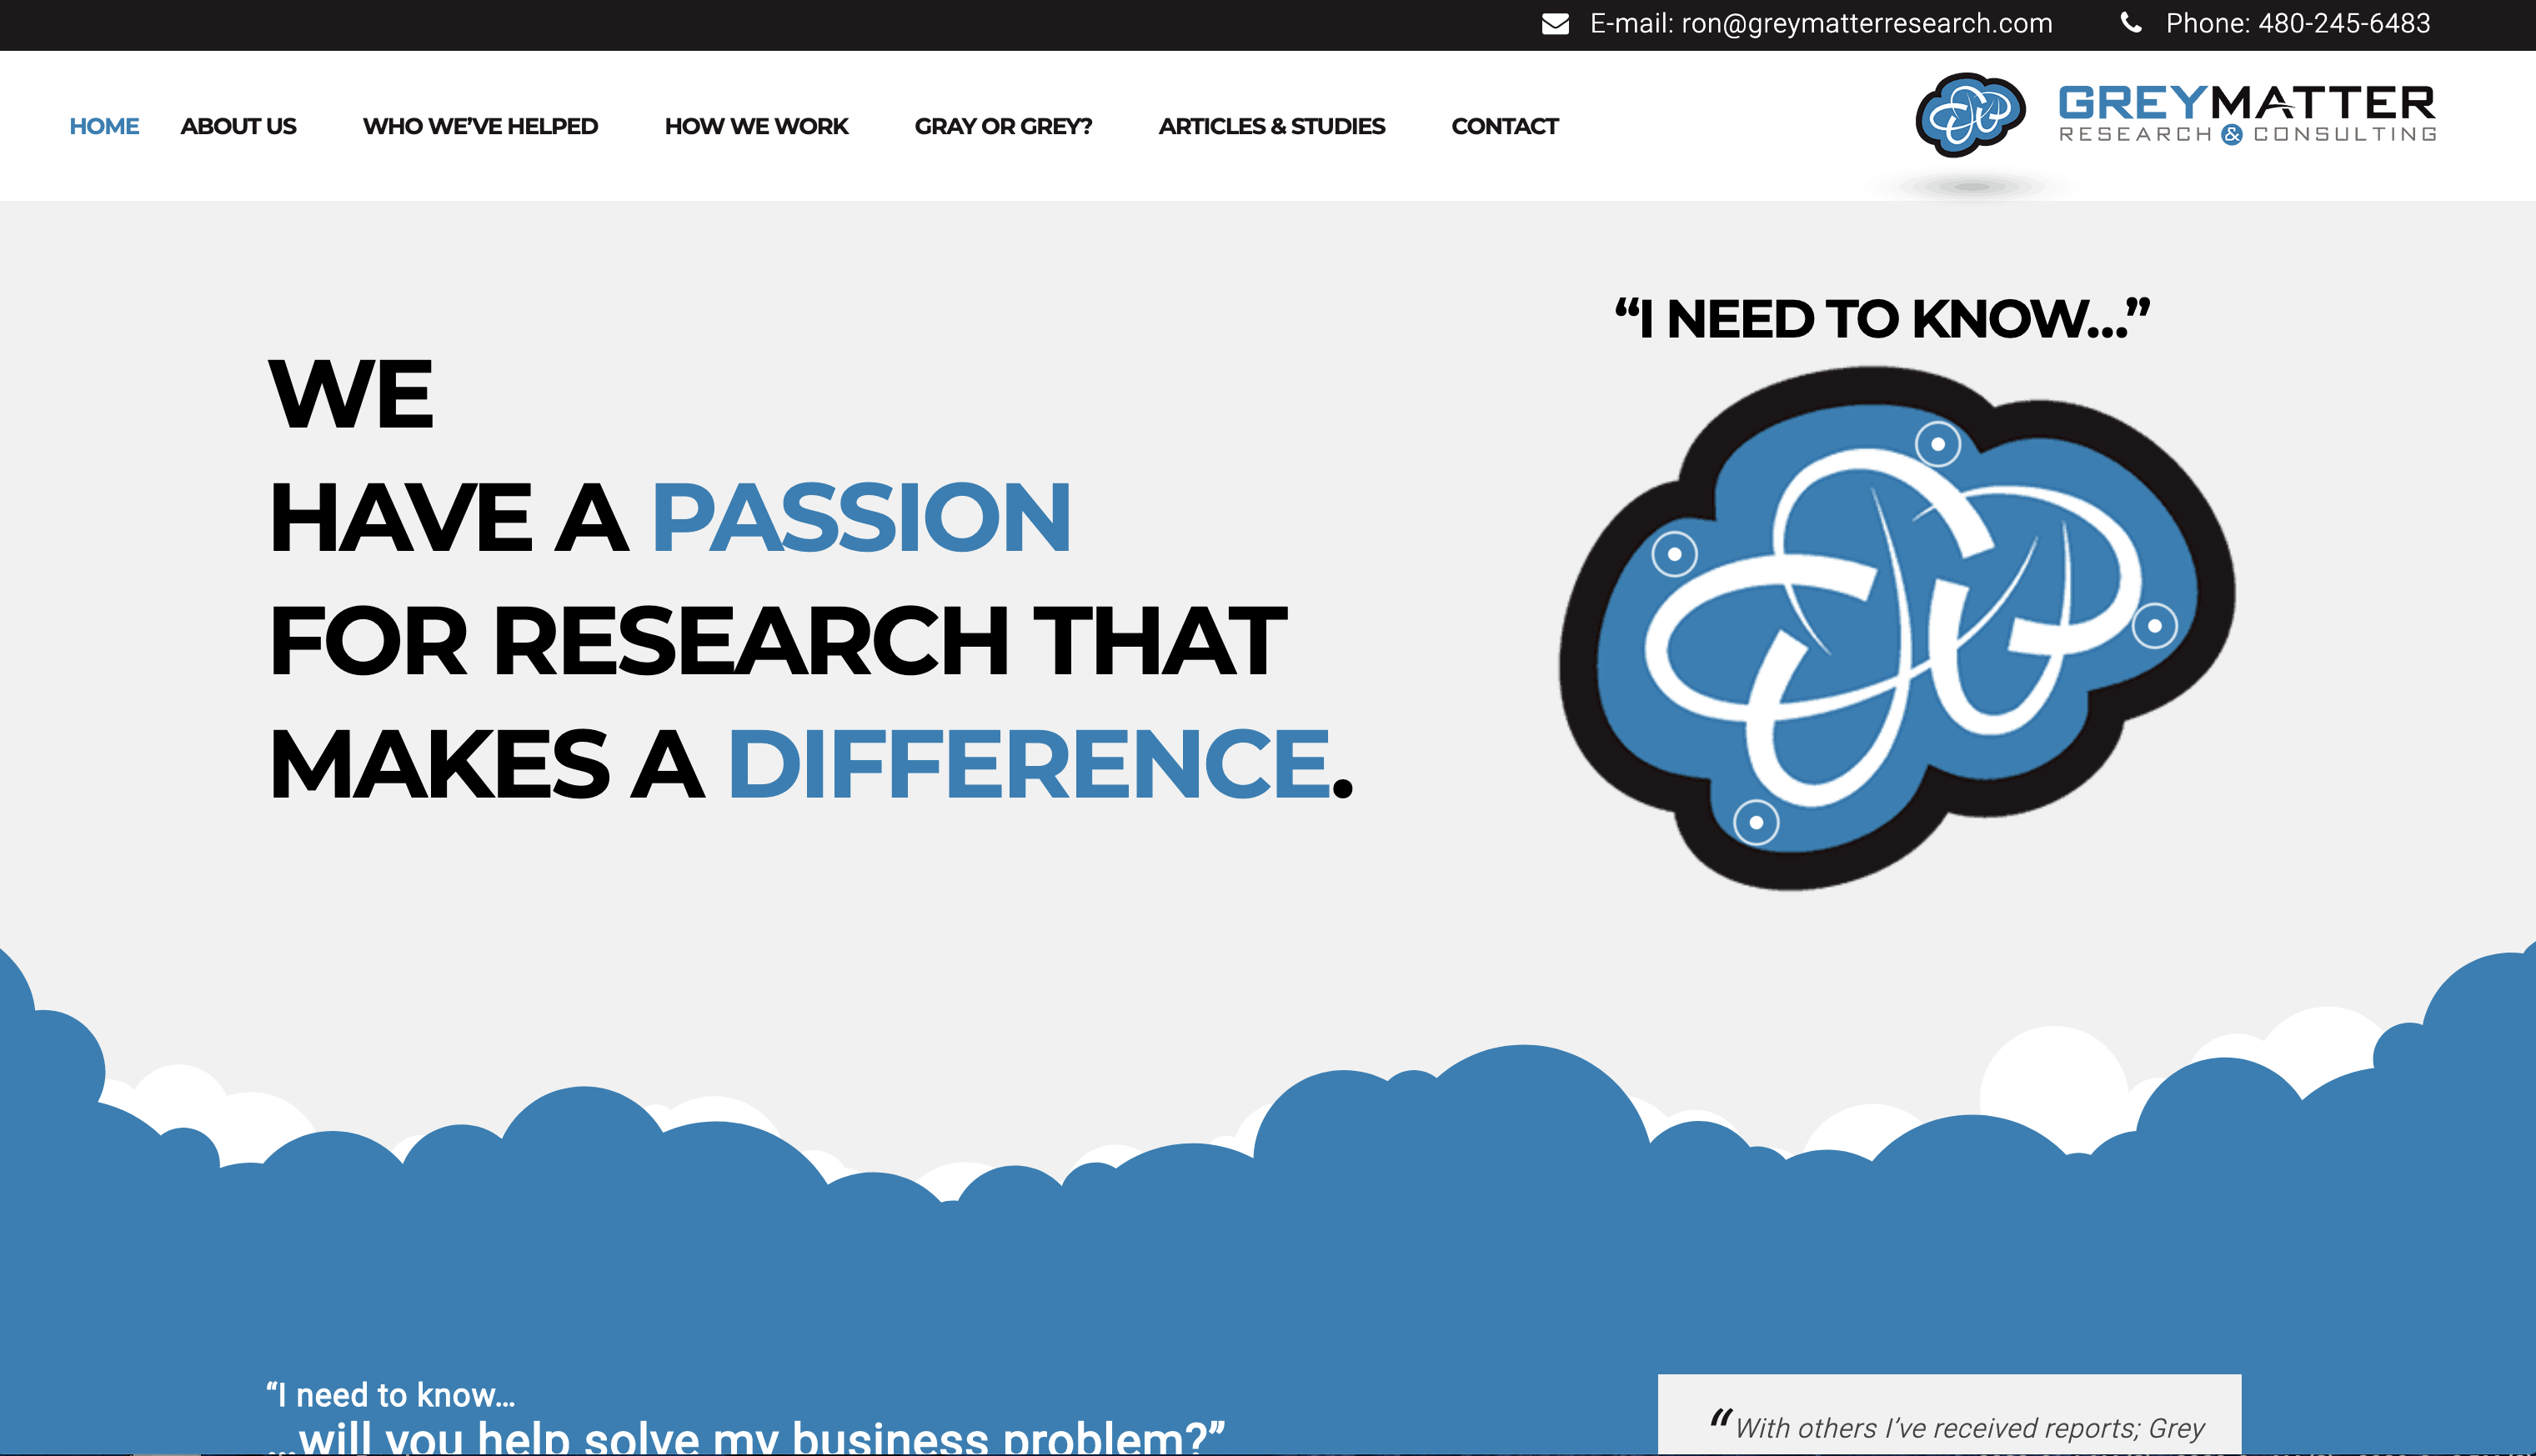 greymatter research consulting website design services